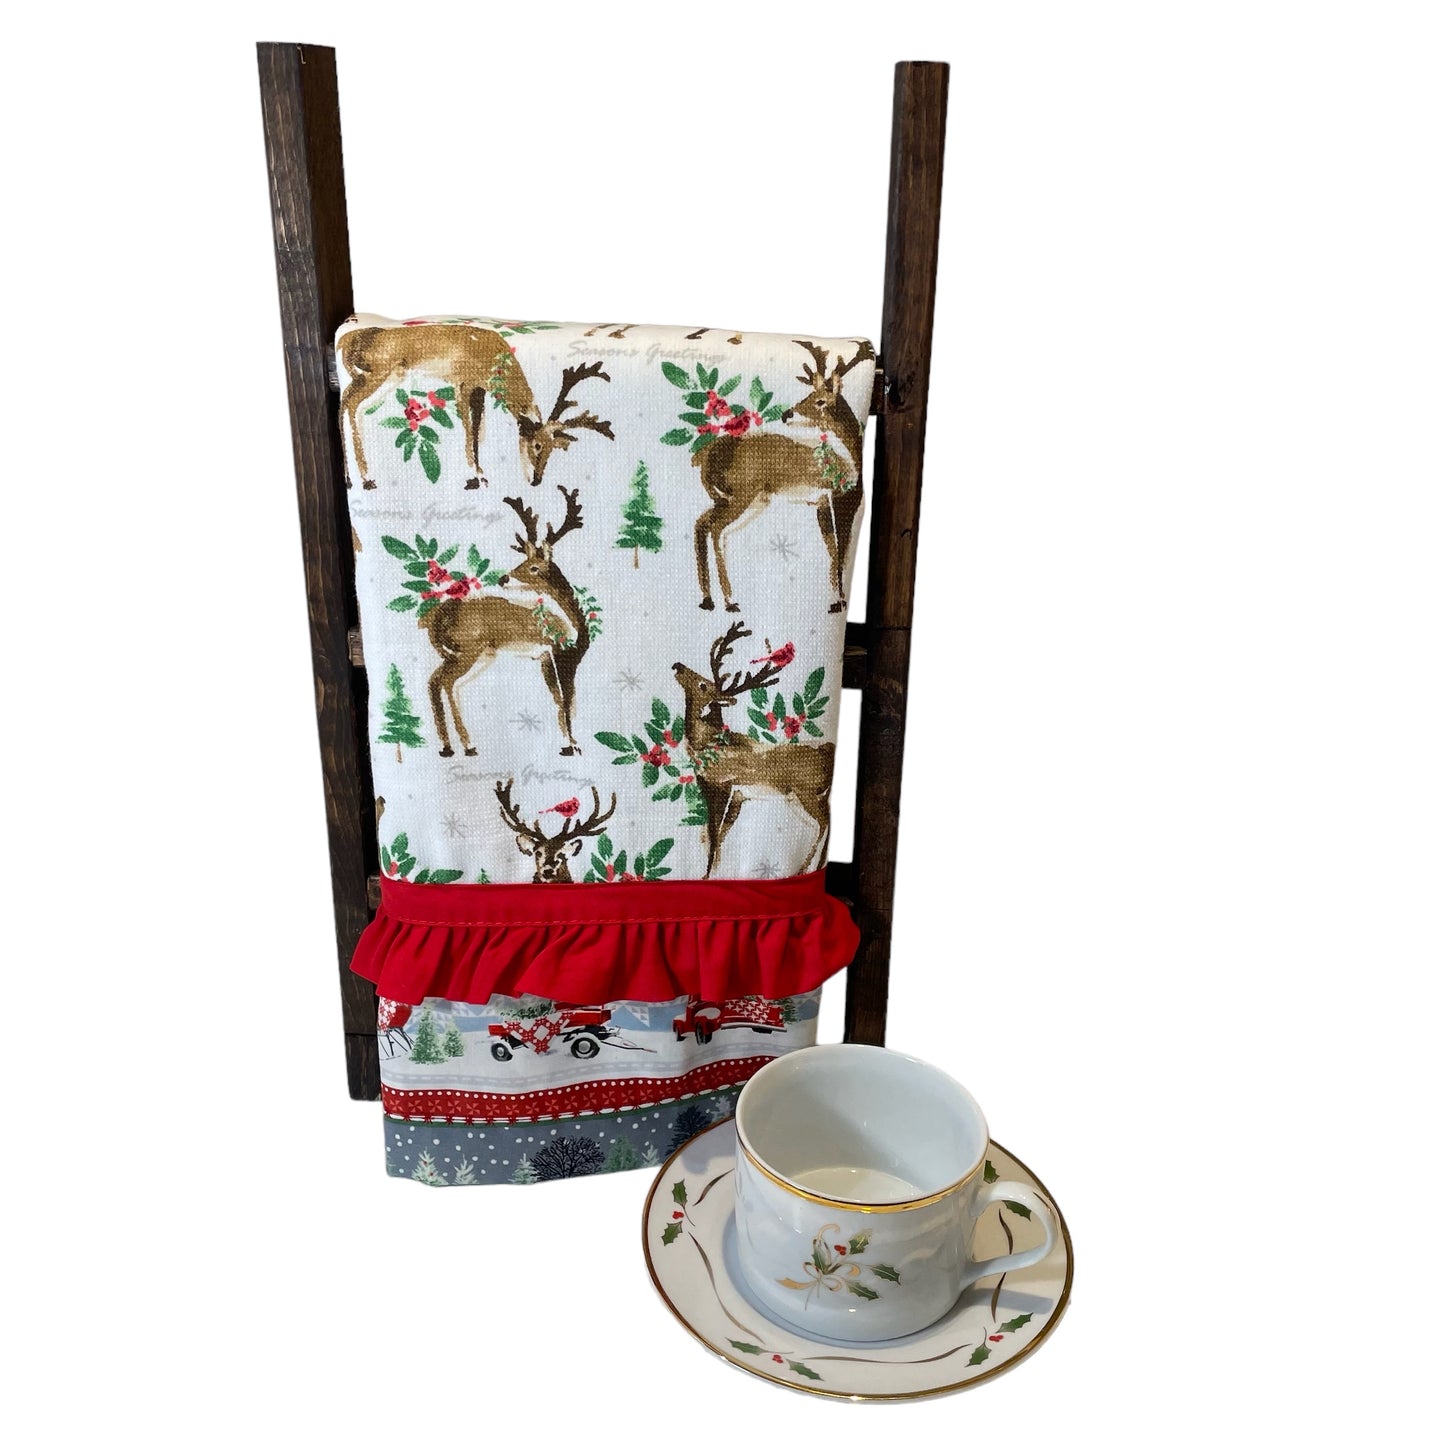 Handcrafted Christmas Reindeer Kitchen Tea Towel with Embroidery Stitching and Red Frilled Trim